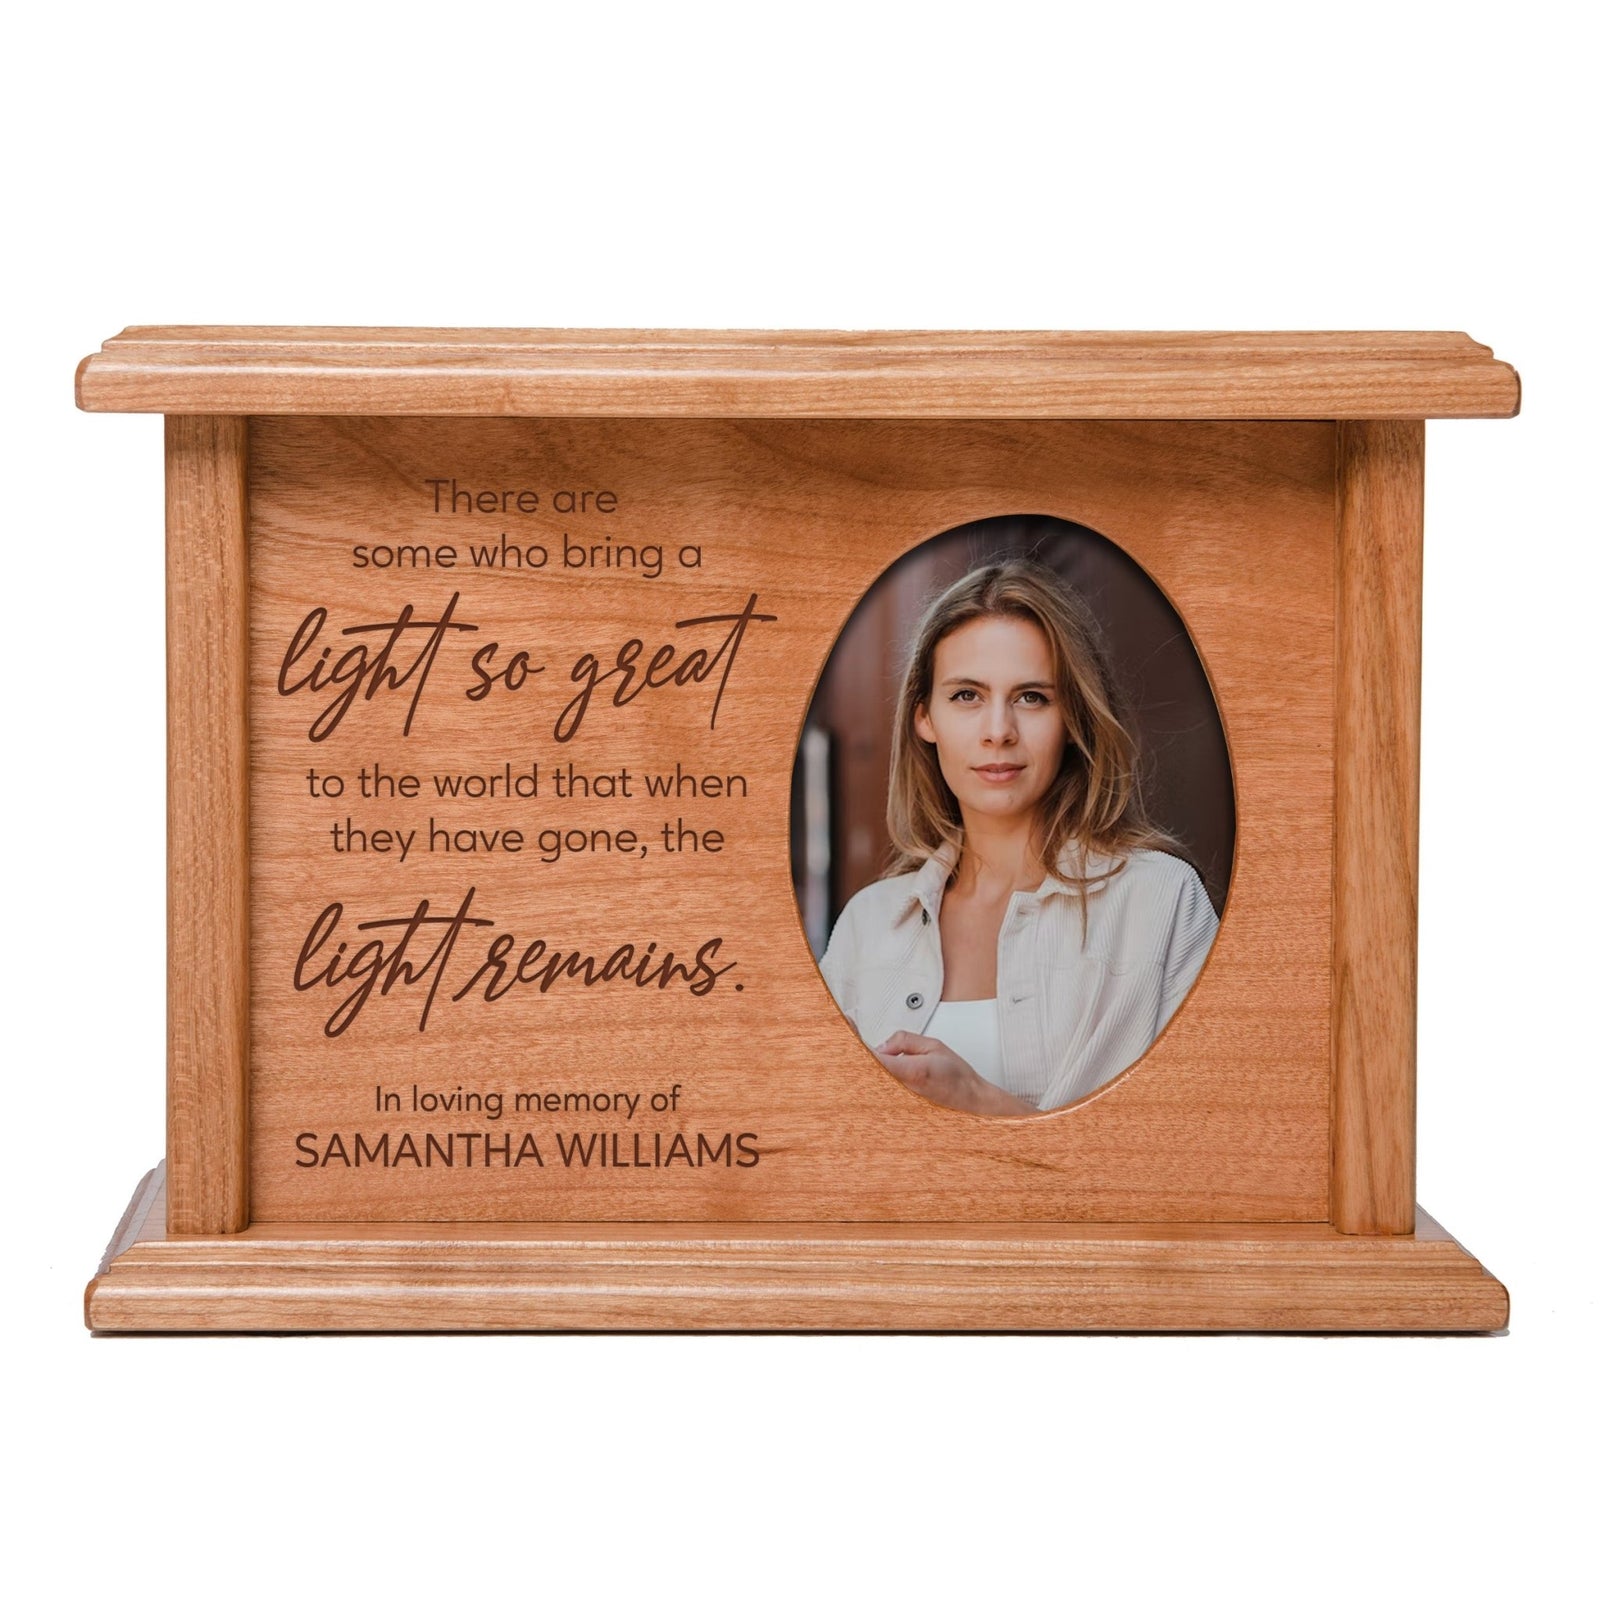 Personalized Wooden Memorial Decorative Photo Urn For Human Ashes - Light So Great - LifeSong Milestones